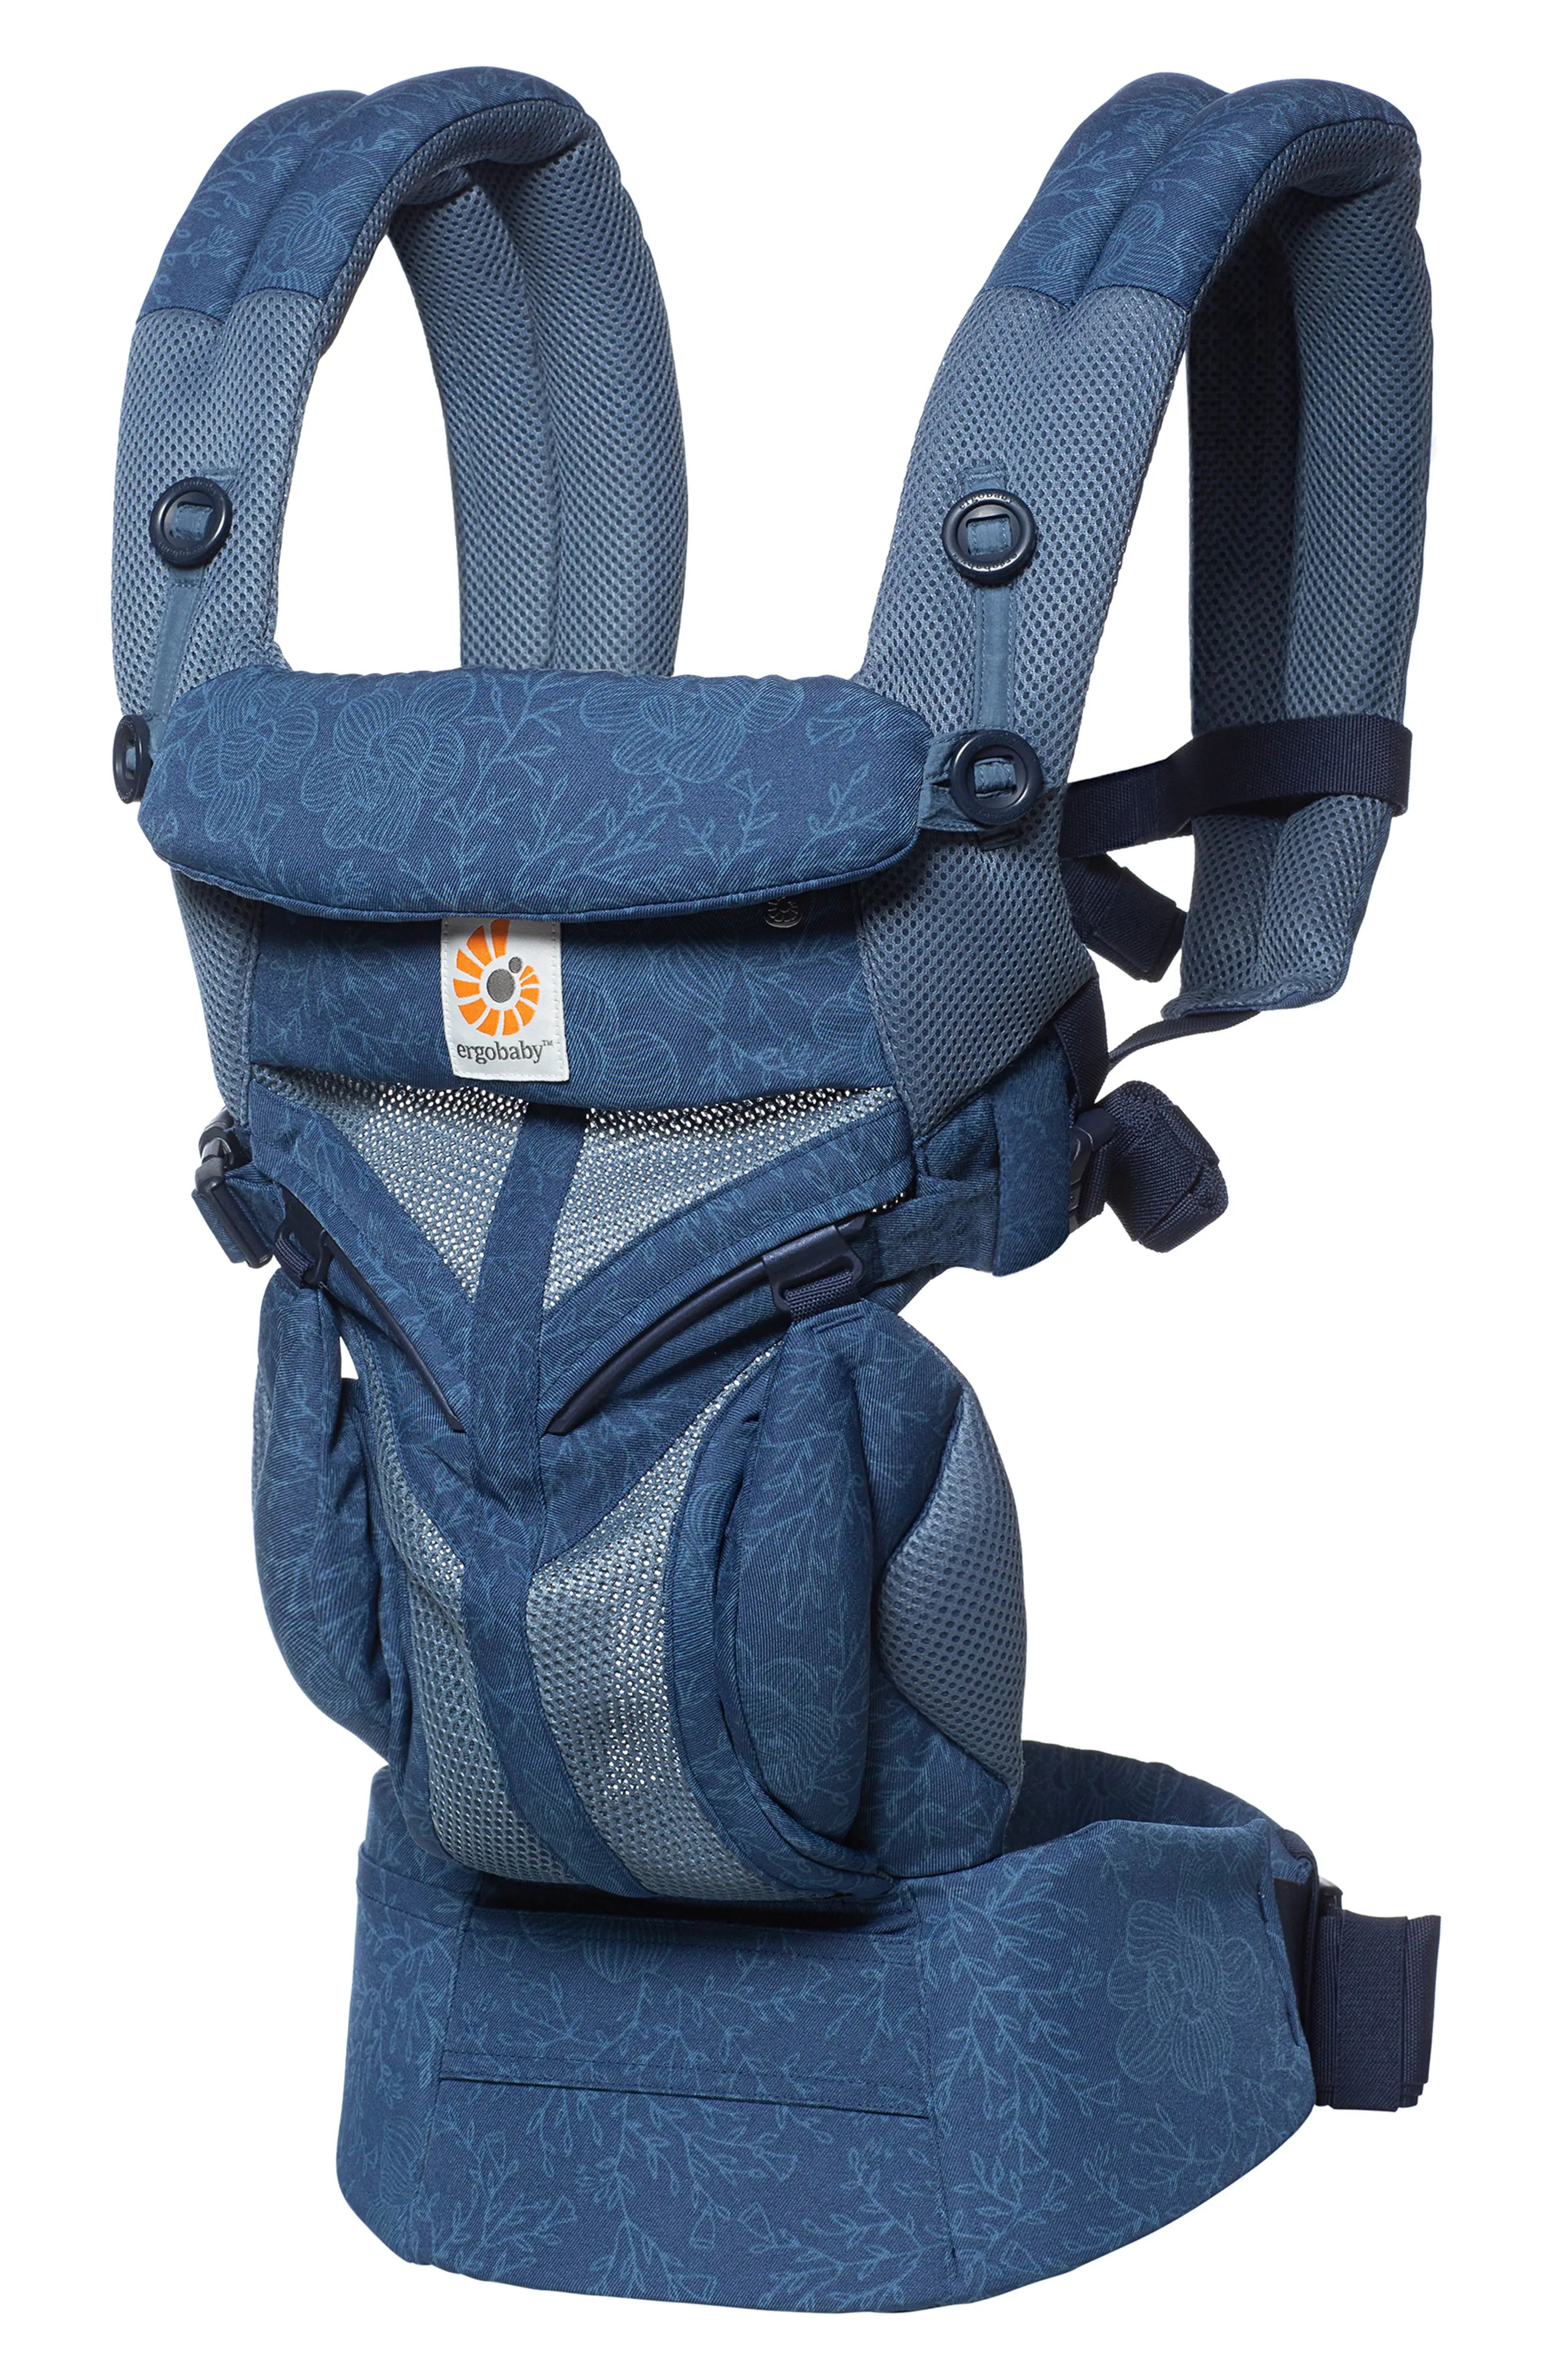 Omni 360 Cool Air Baby Carrier | Nordstrom